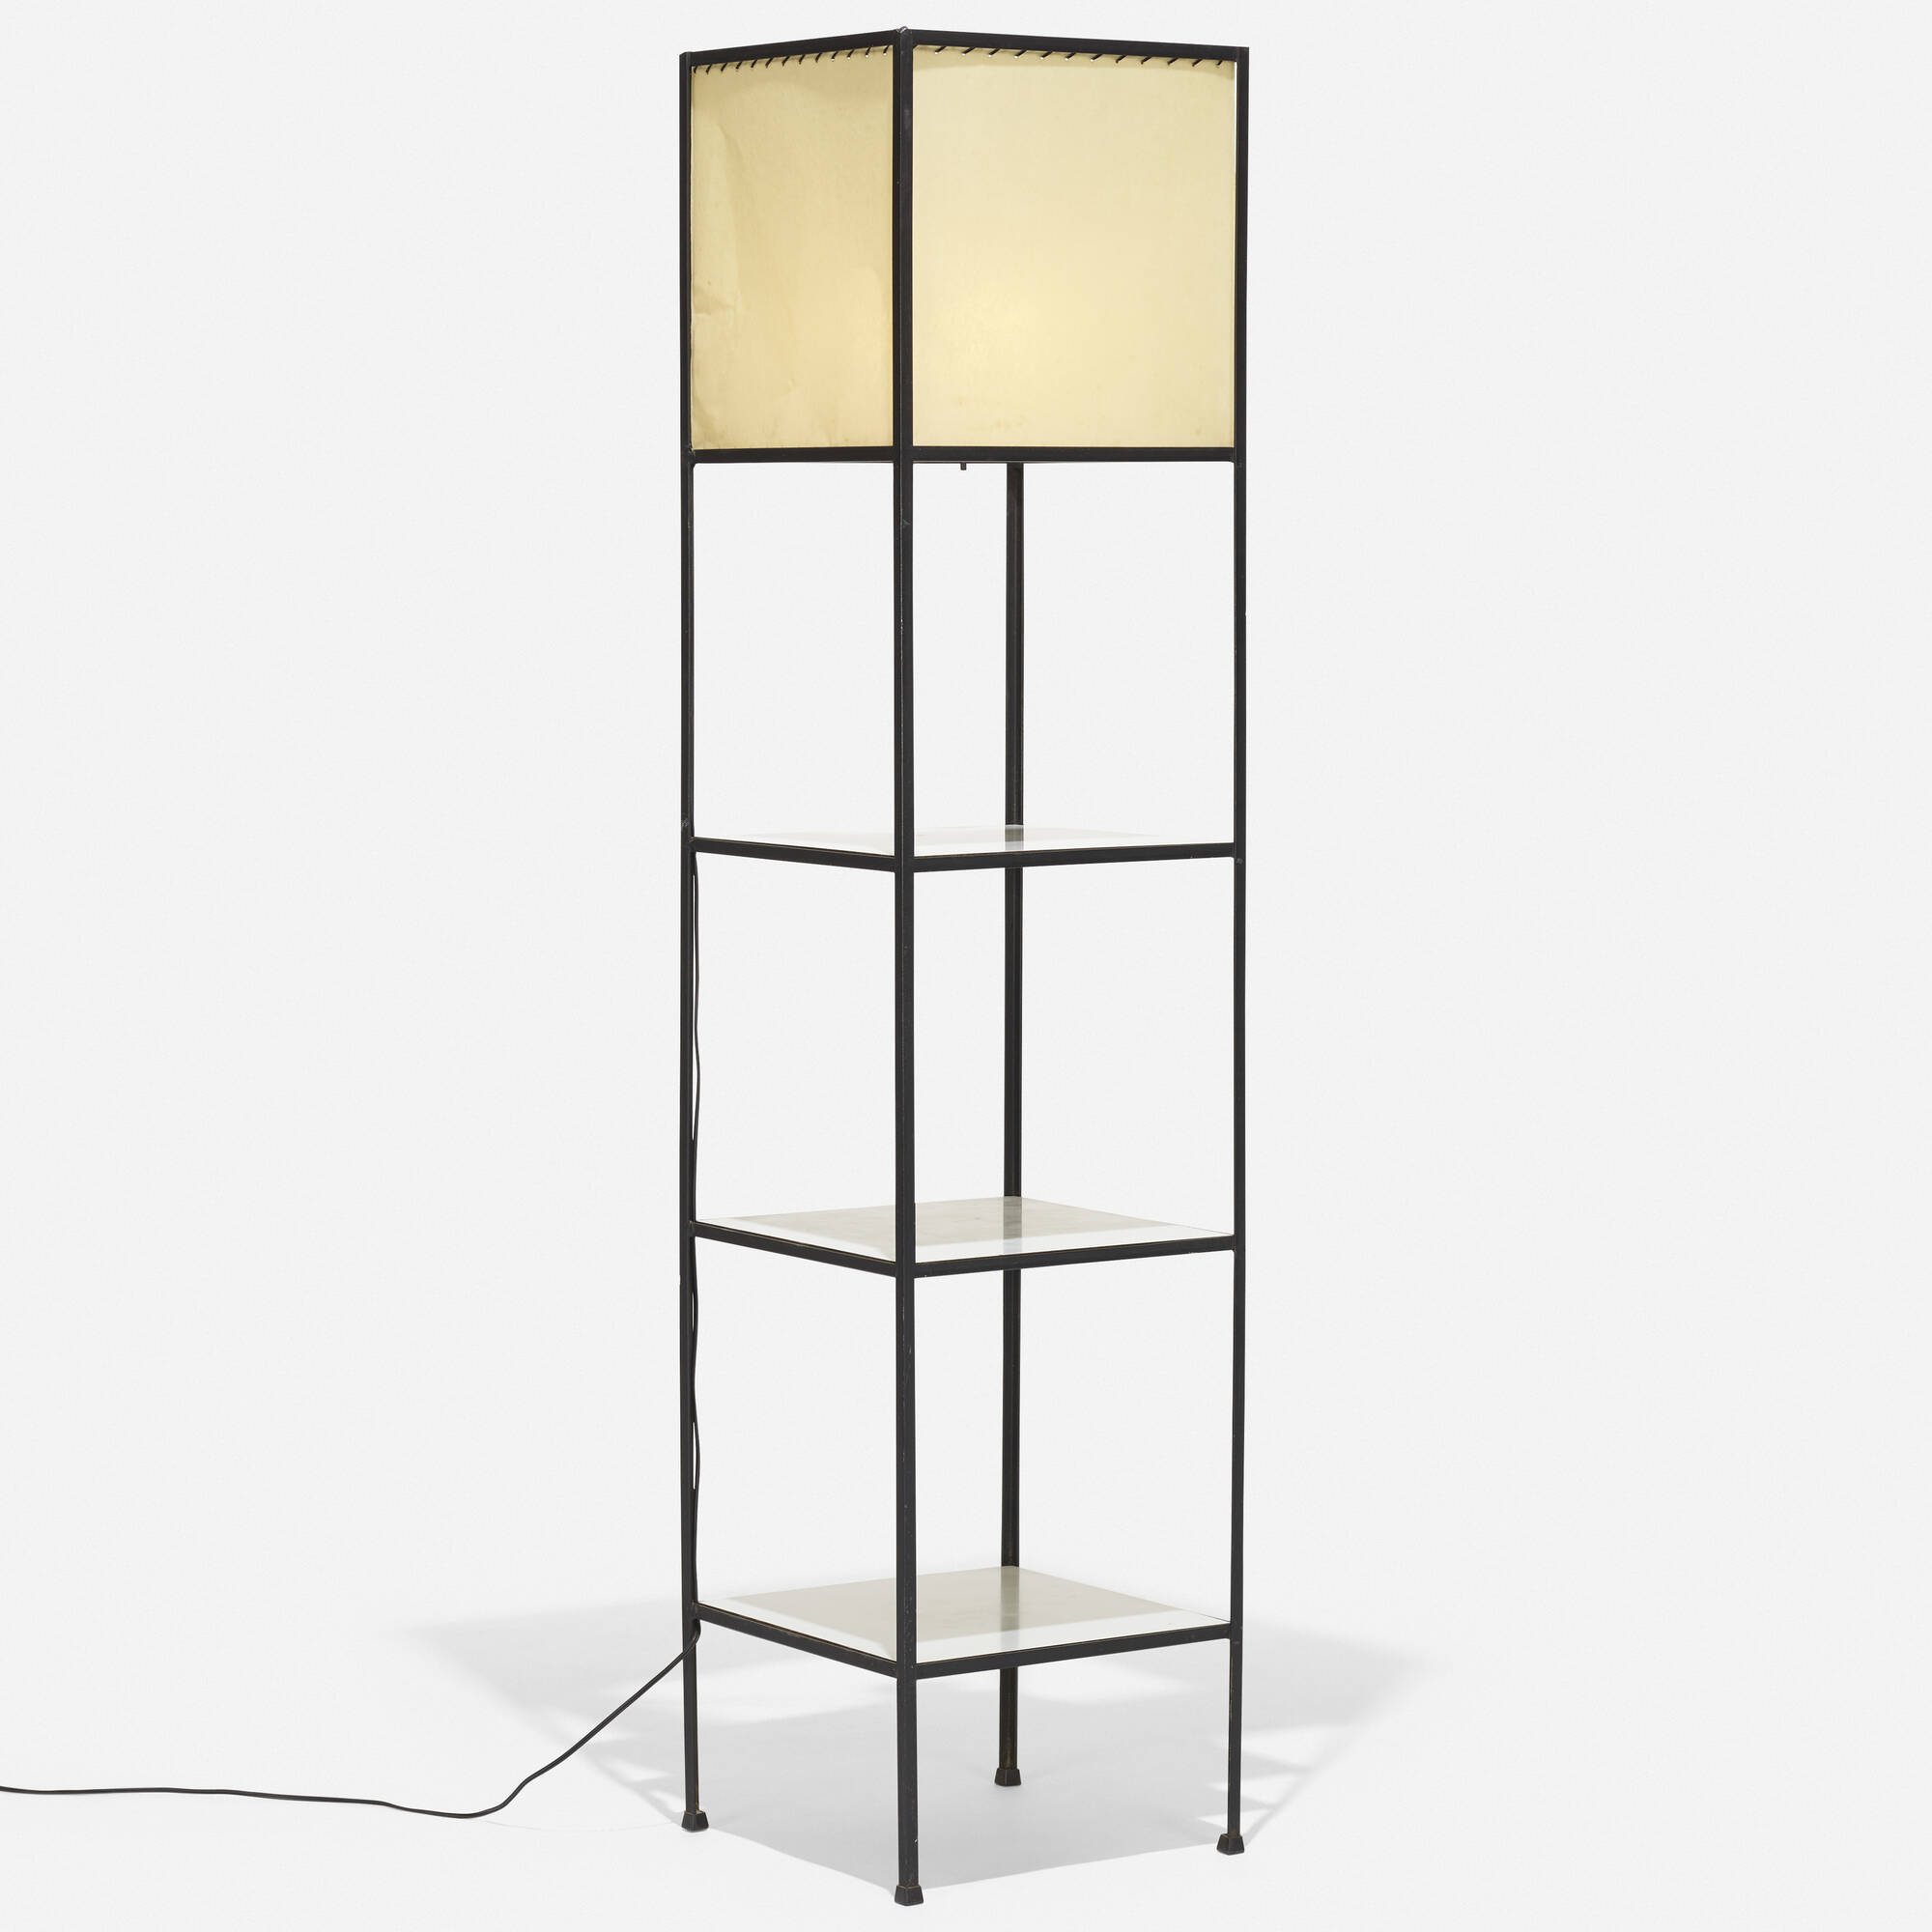 Vet Geschikt onszelf 242: FREDERIC WEINBERG, vitrine lamp < American Design, 20 February 2020 <  Auctions | Wright: Auctions of Art and Design